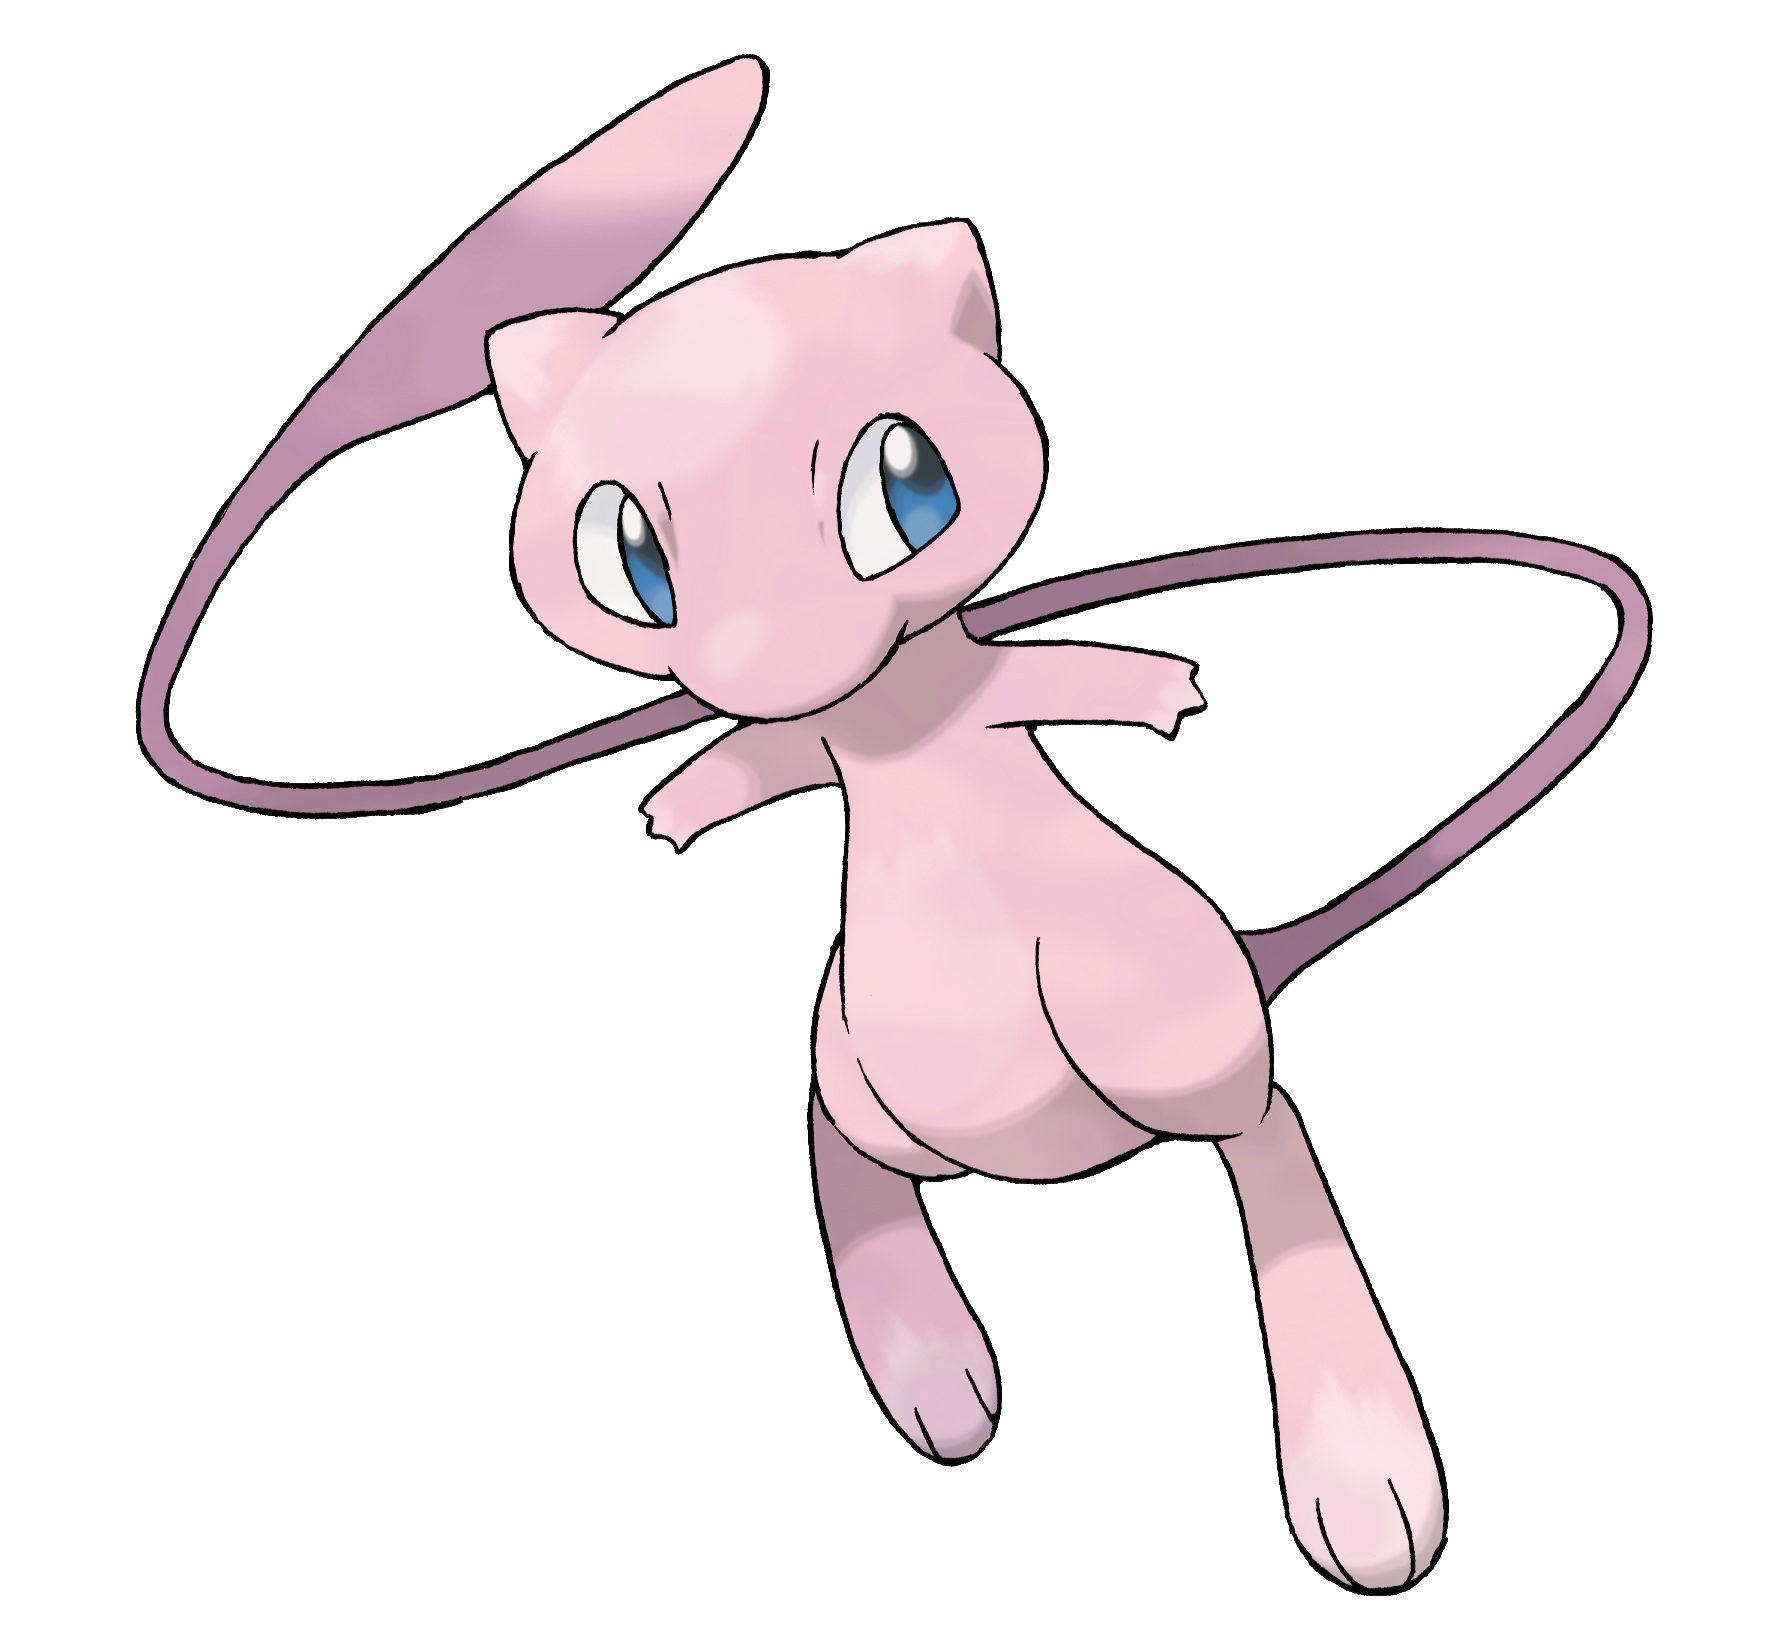 http://images3.wikia.nocookie.net/__cb20100110045528/es.pokemon/images/b/bf/Mew.png